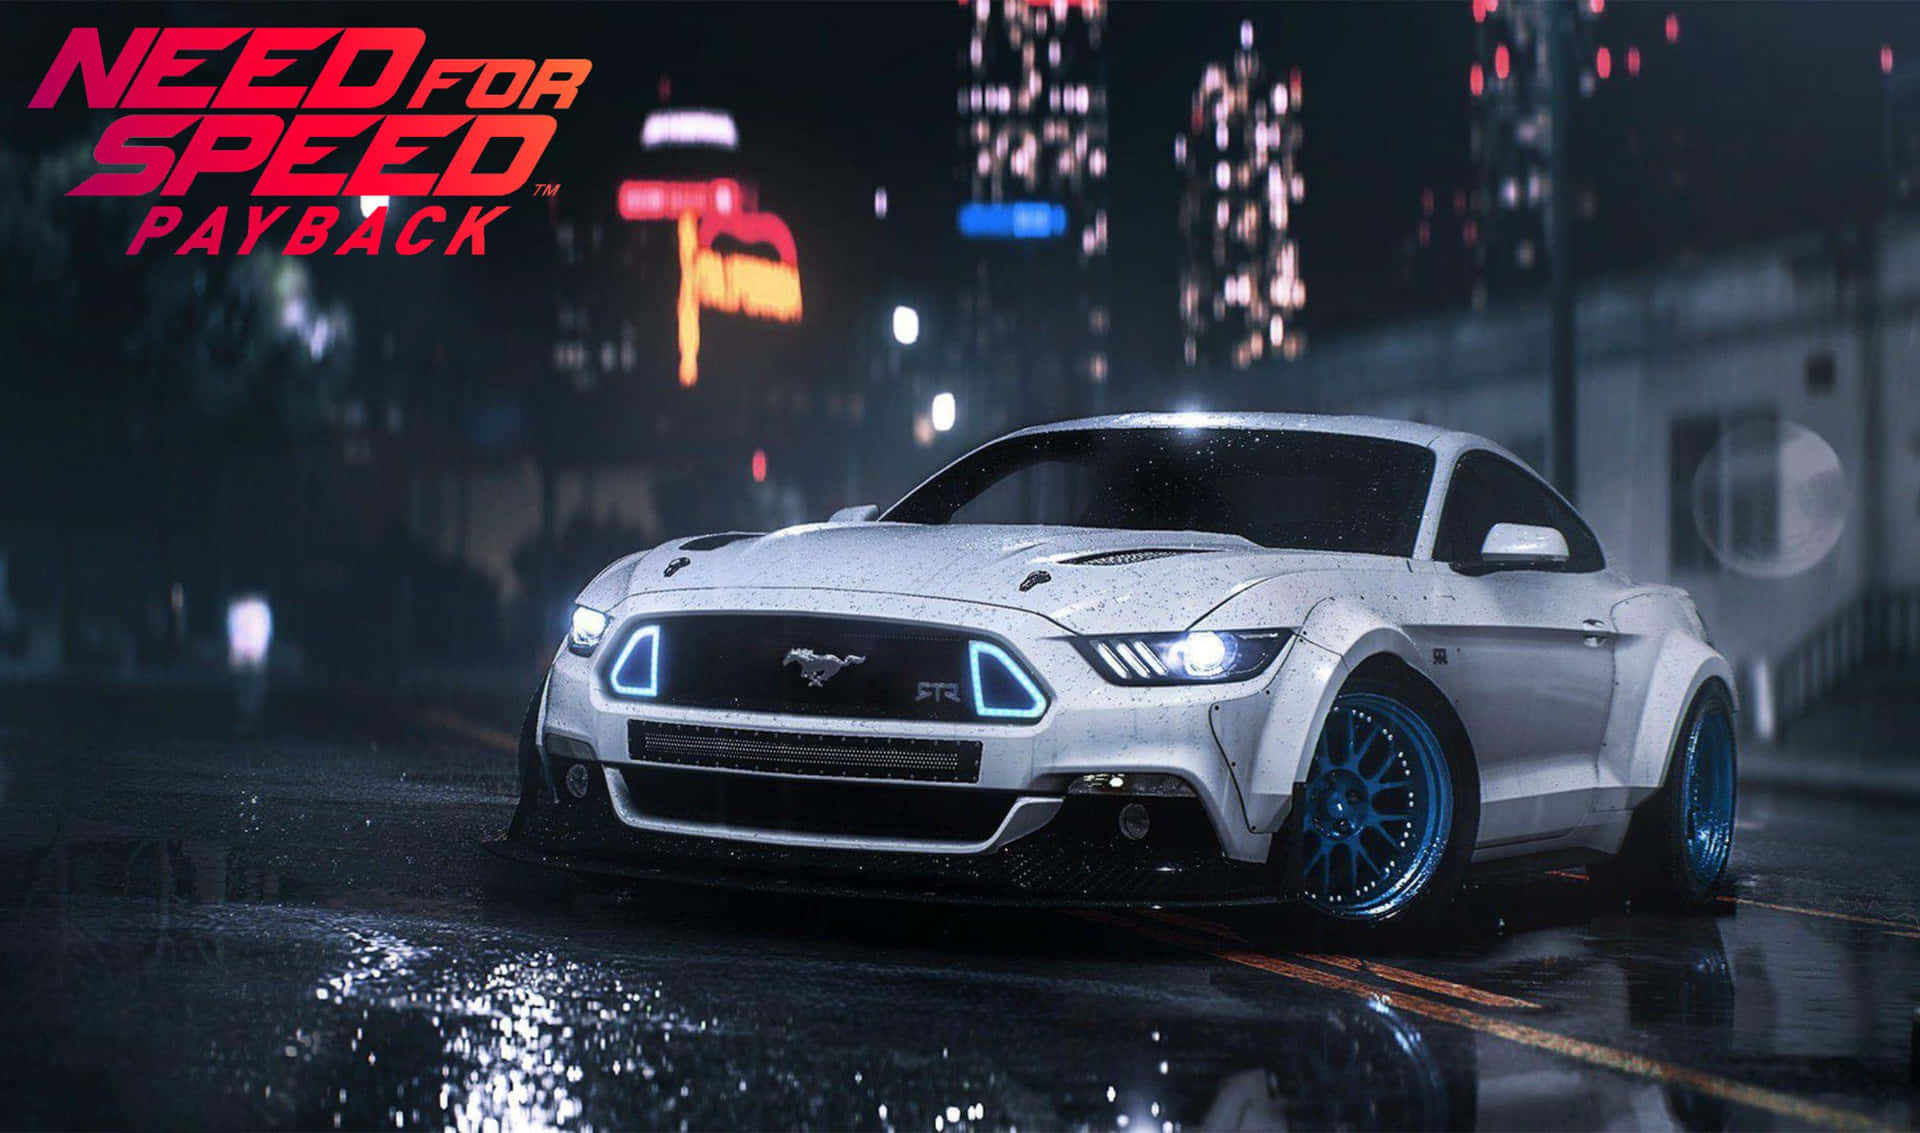 Feel the Rush with Need For Speed Payback